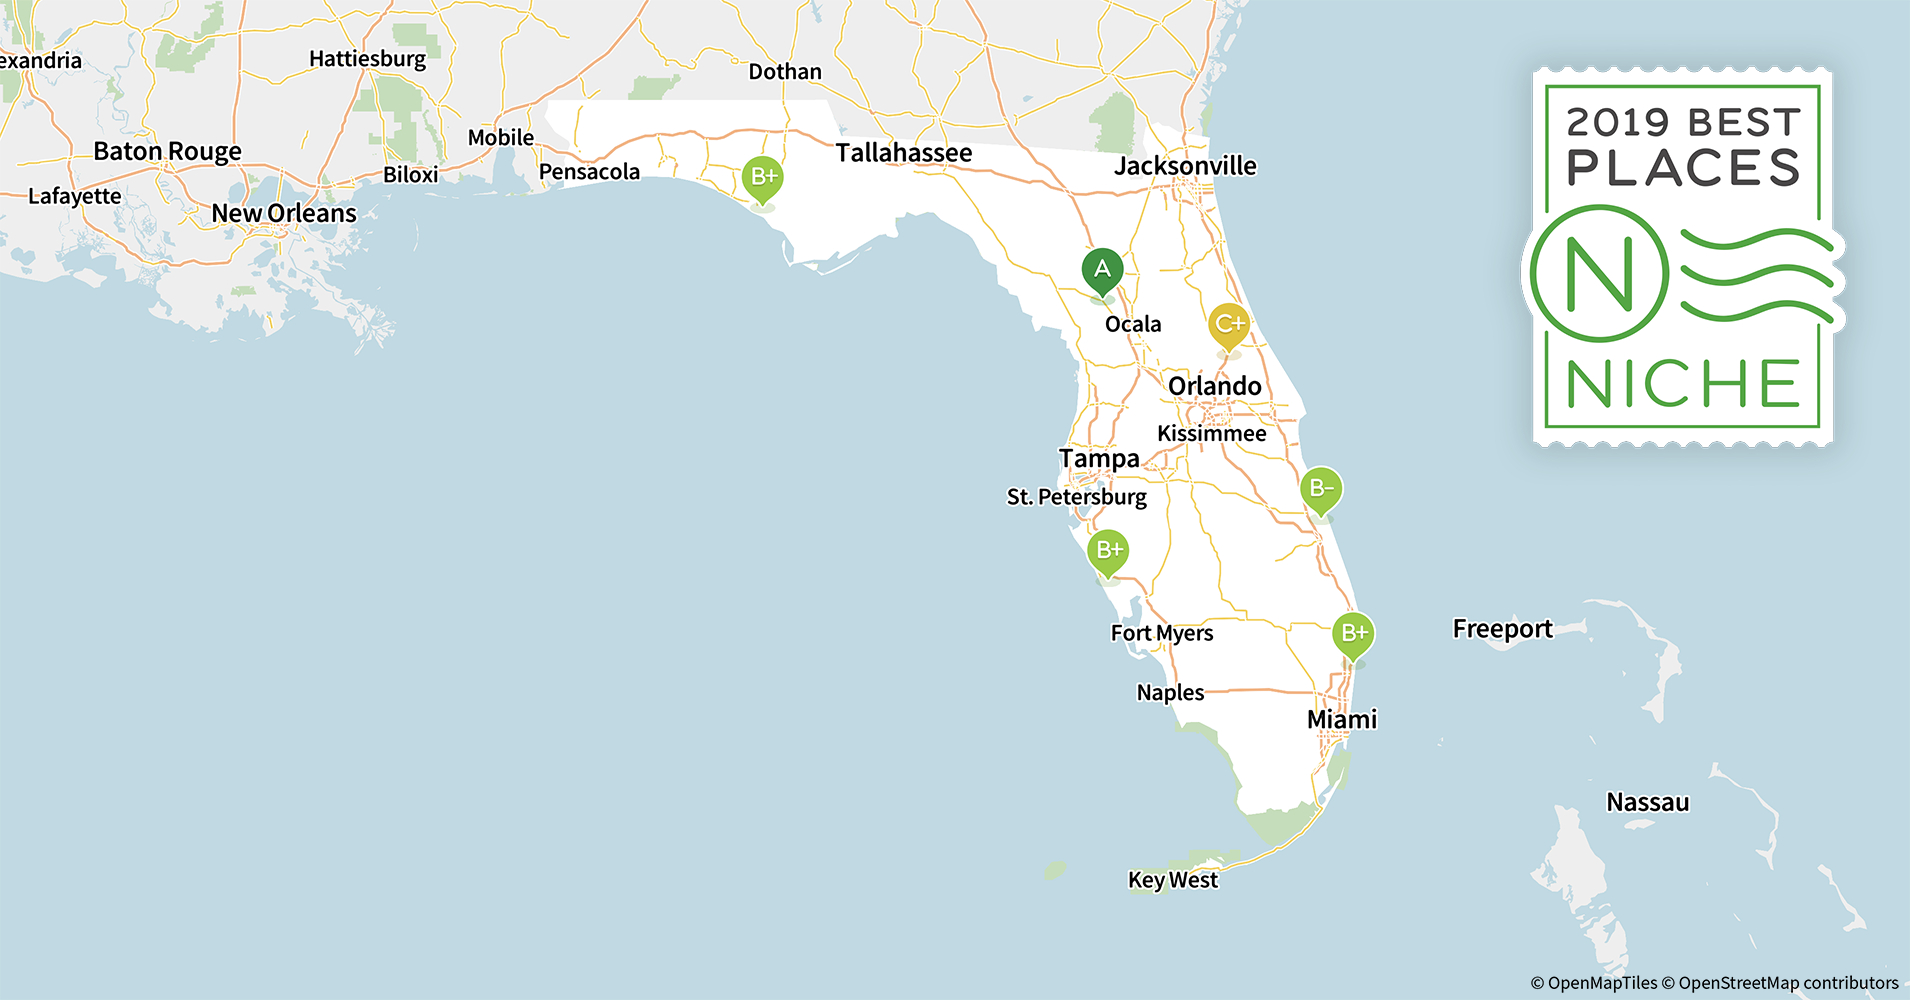 2019 Best Places To Live In Florida - Niche - Map Of Lake City Florida And Surrounding Area